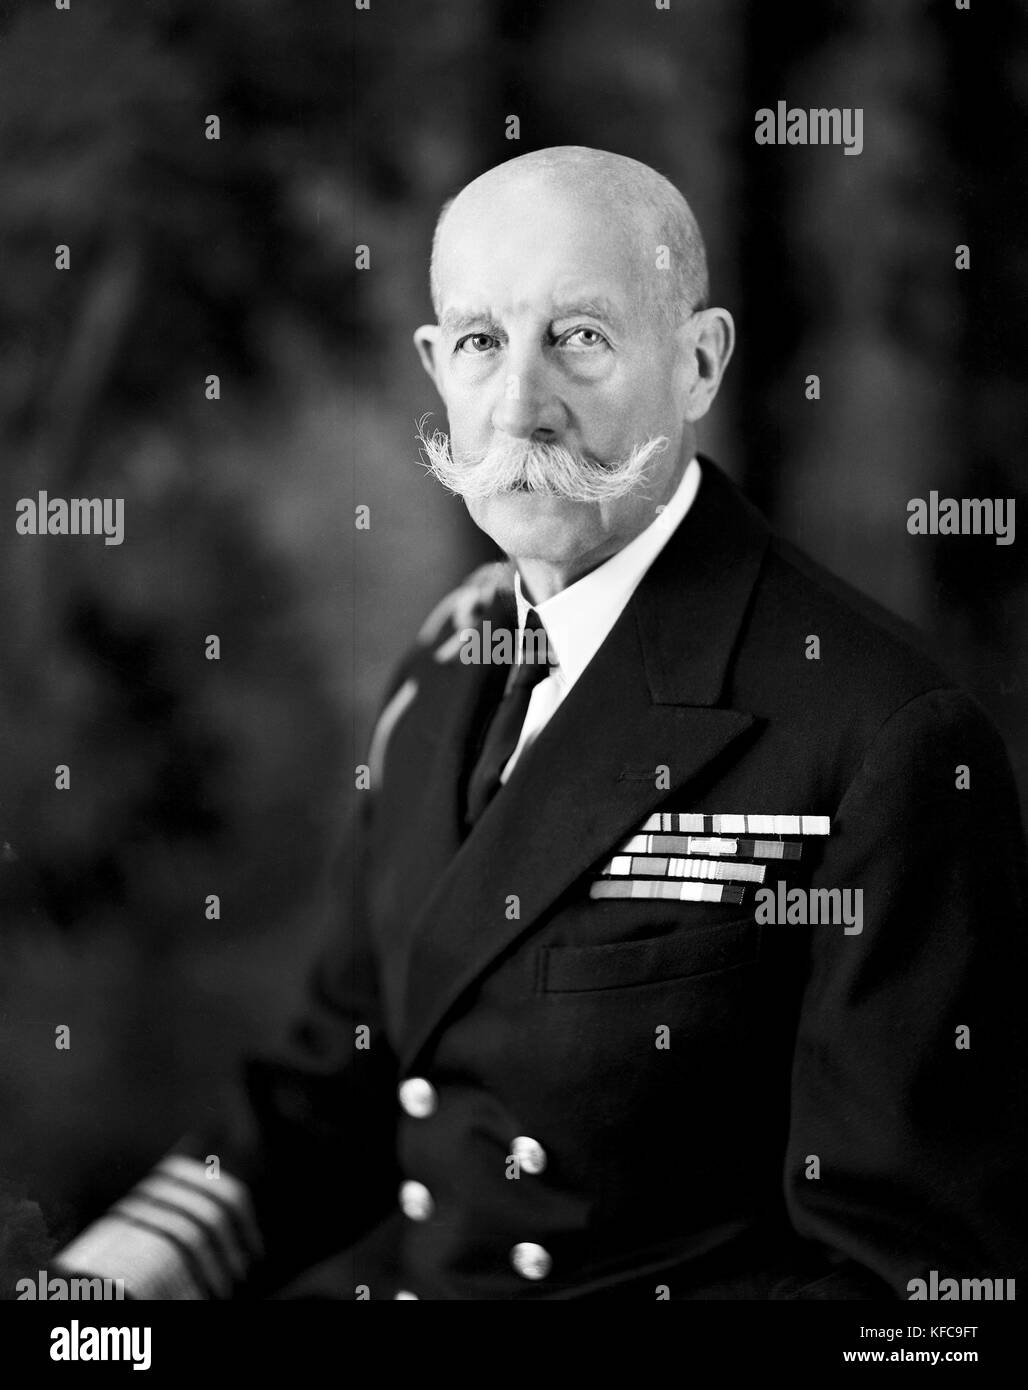 Prince George of Greece and Denmark (1869-1957) wearing his uniform of admiral. Second son of King George 1st of Greece.  1953  Taponier Photo Photo12.com - Coll. Taponier Stock Photo